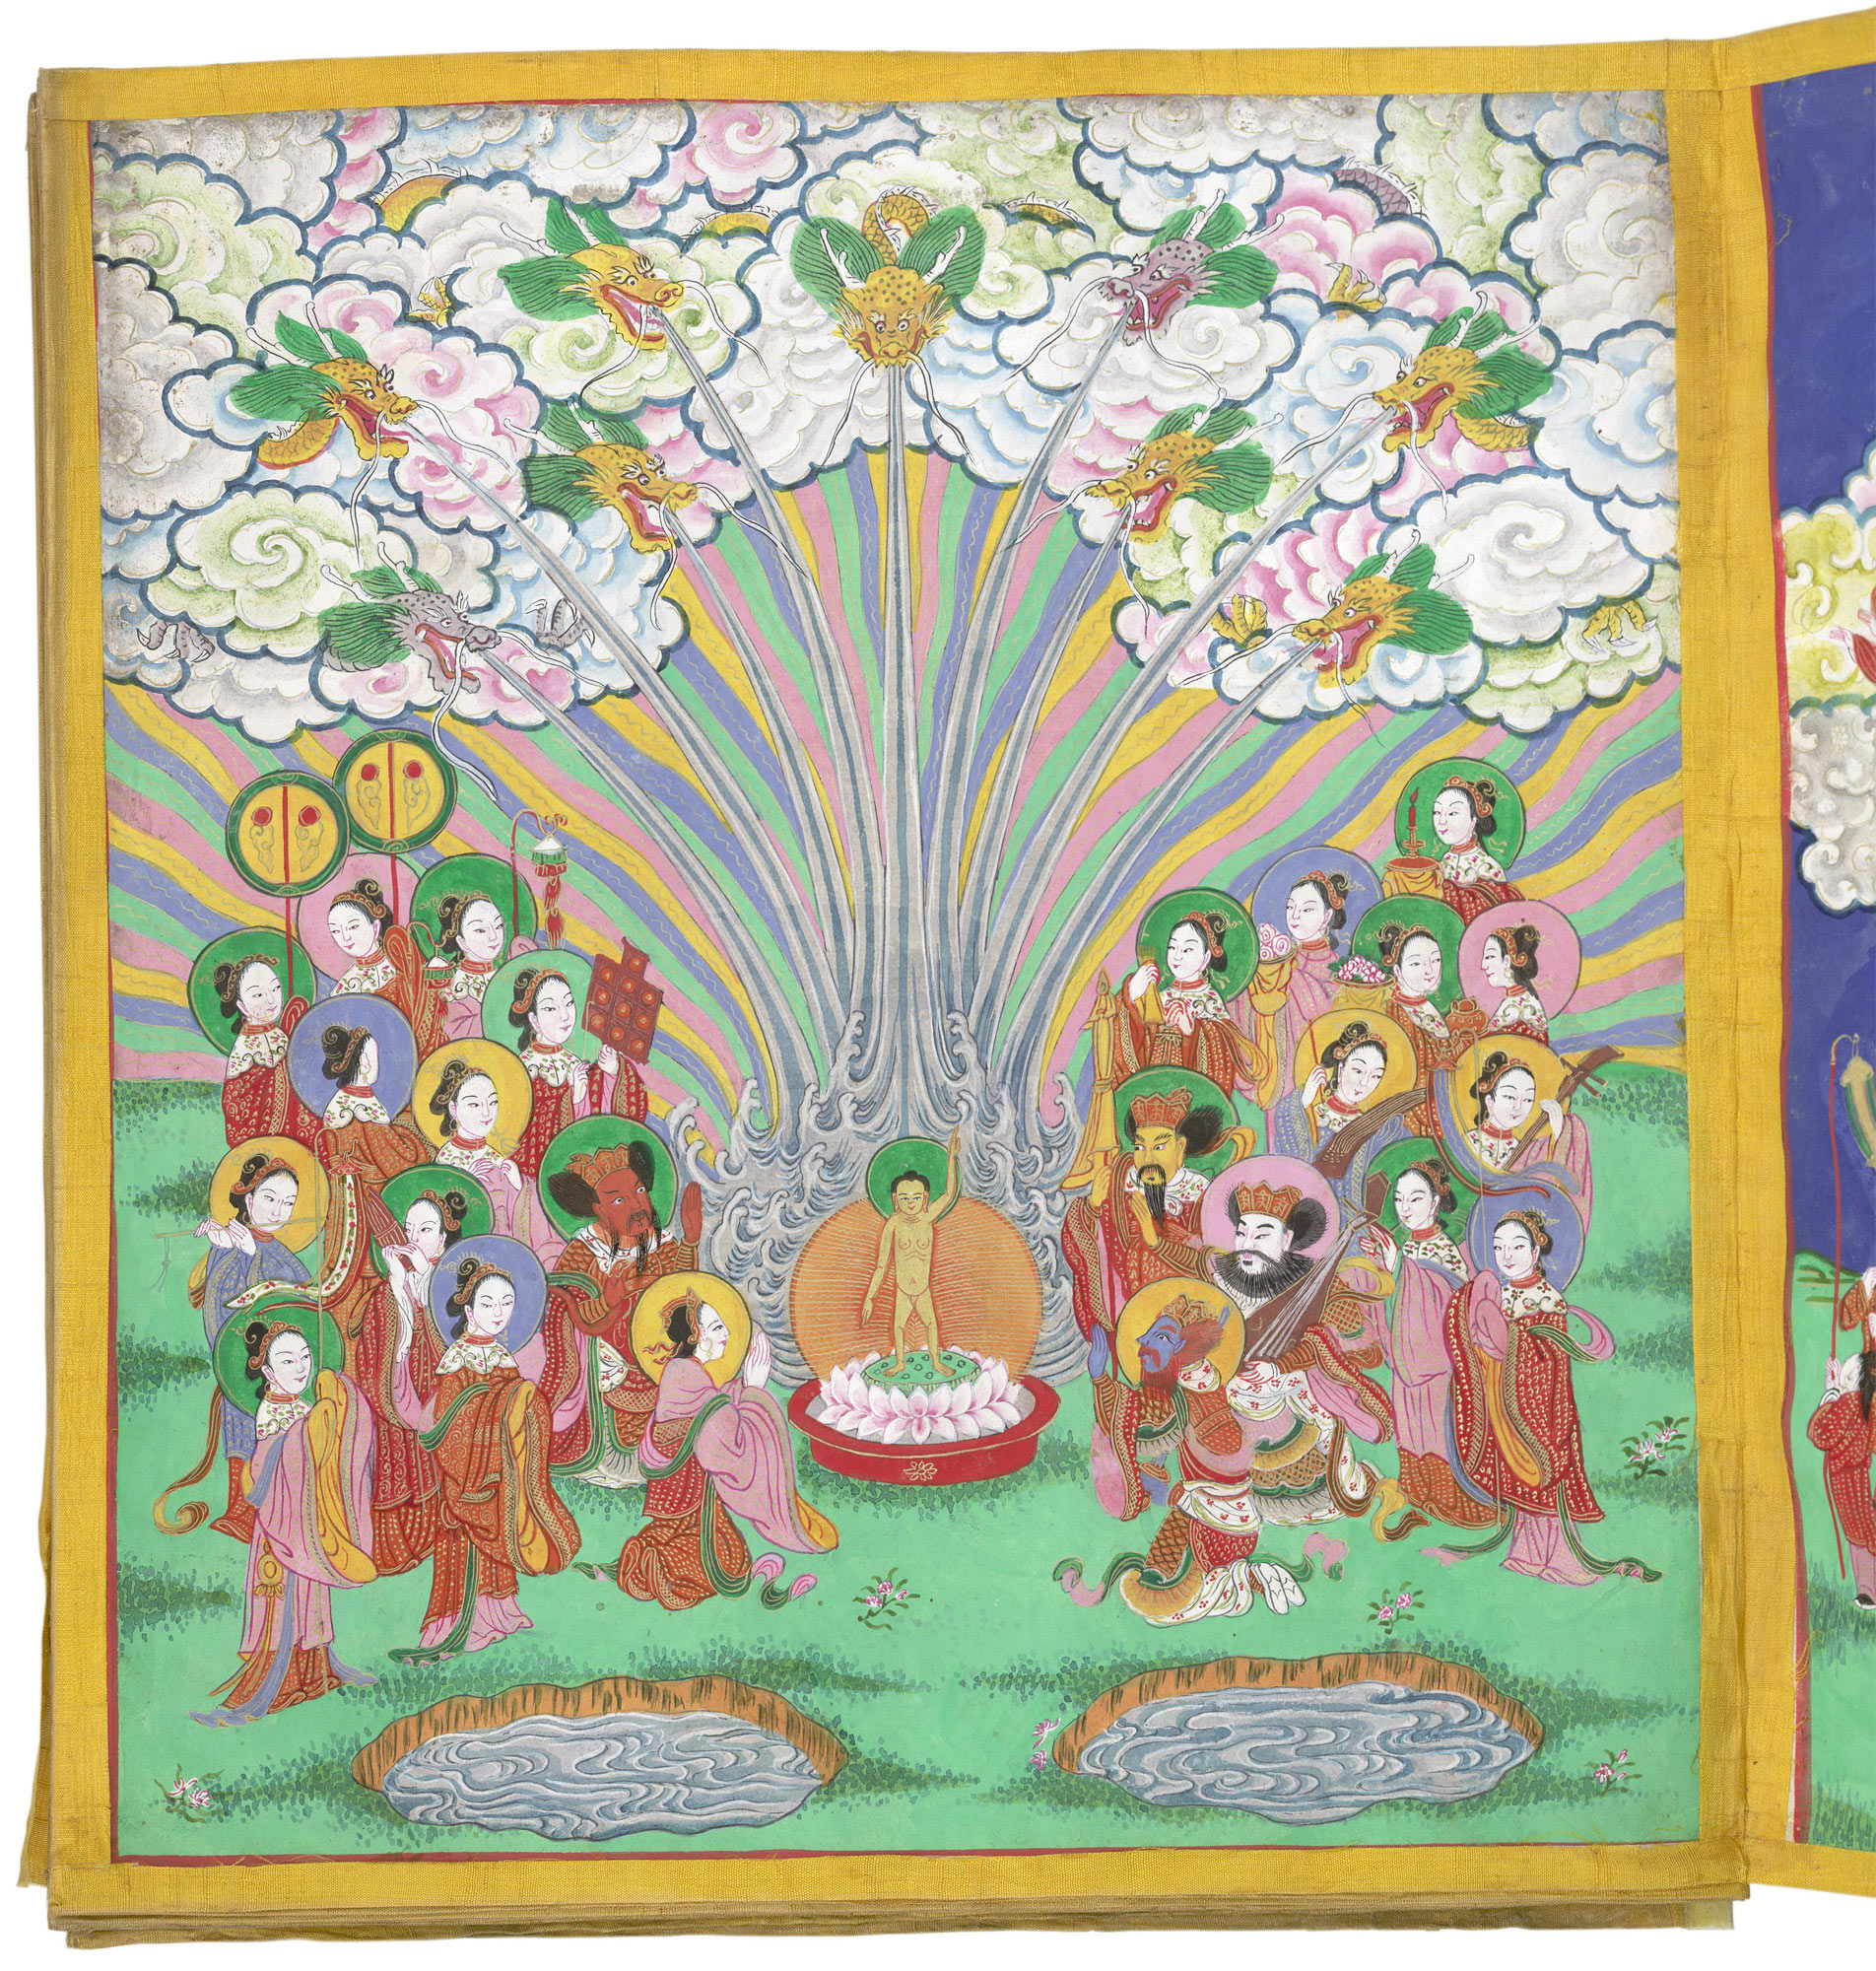 The British Library will also hold an exhibition on Buddhism